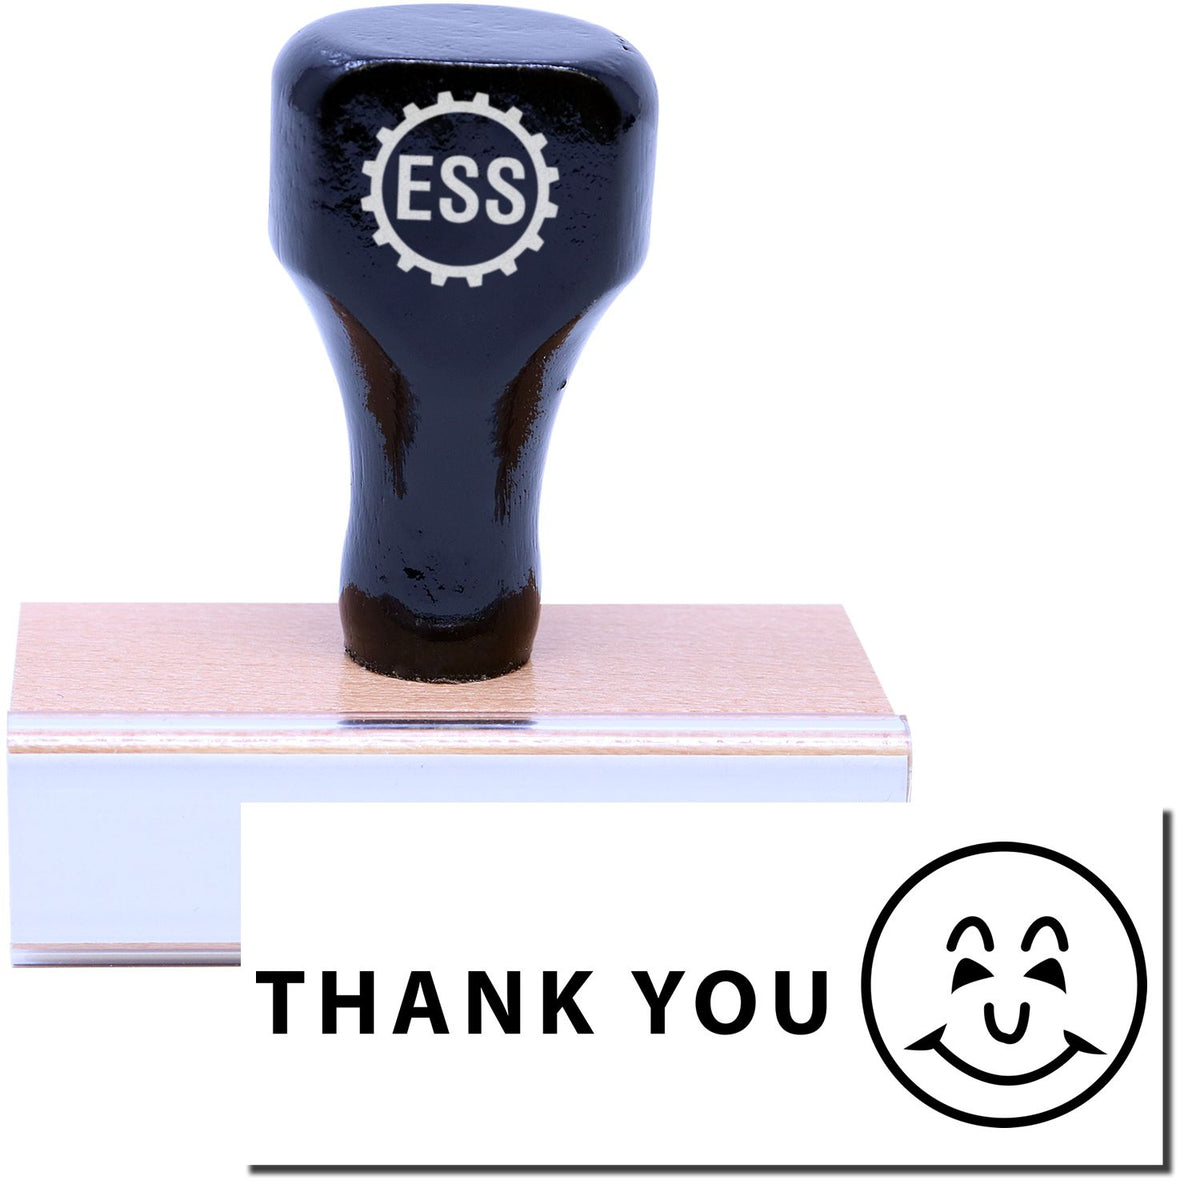 A stock office rubber stamp with a stamped image showing how the text &quot;THANK YOU&quot; in a large font with a smiley icon on the right side is displayed after stamping.